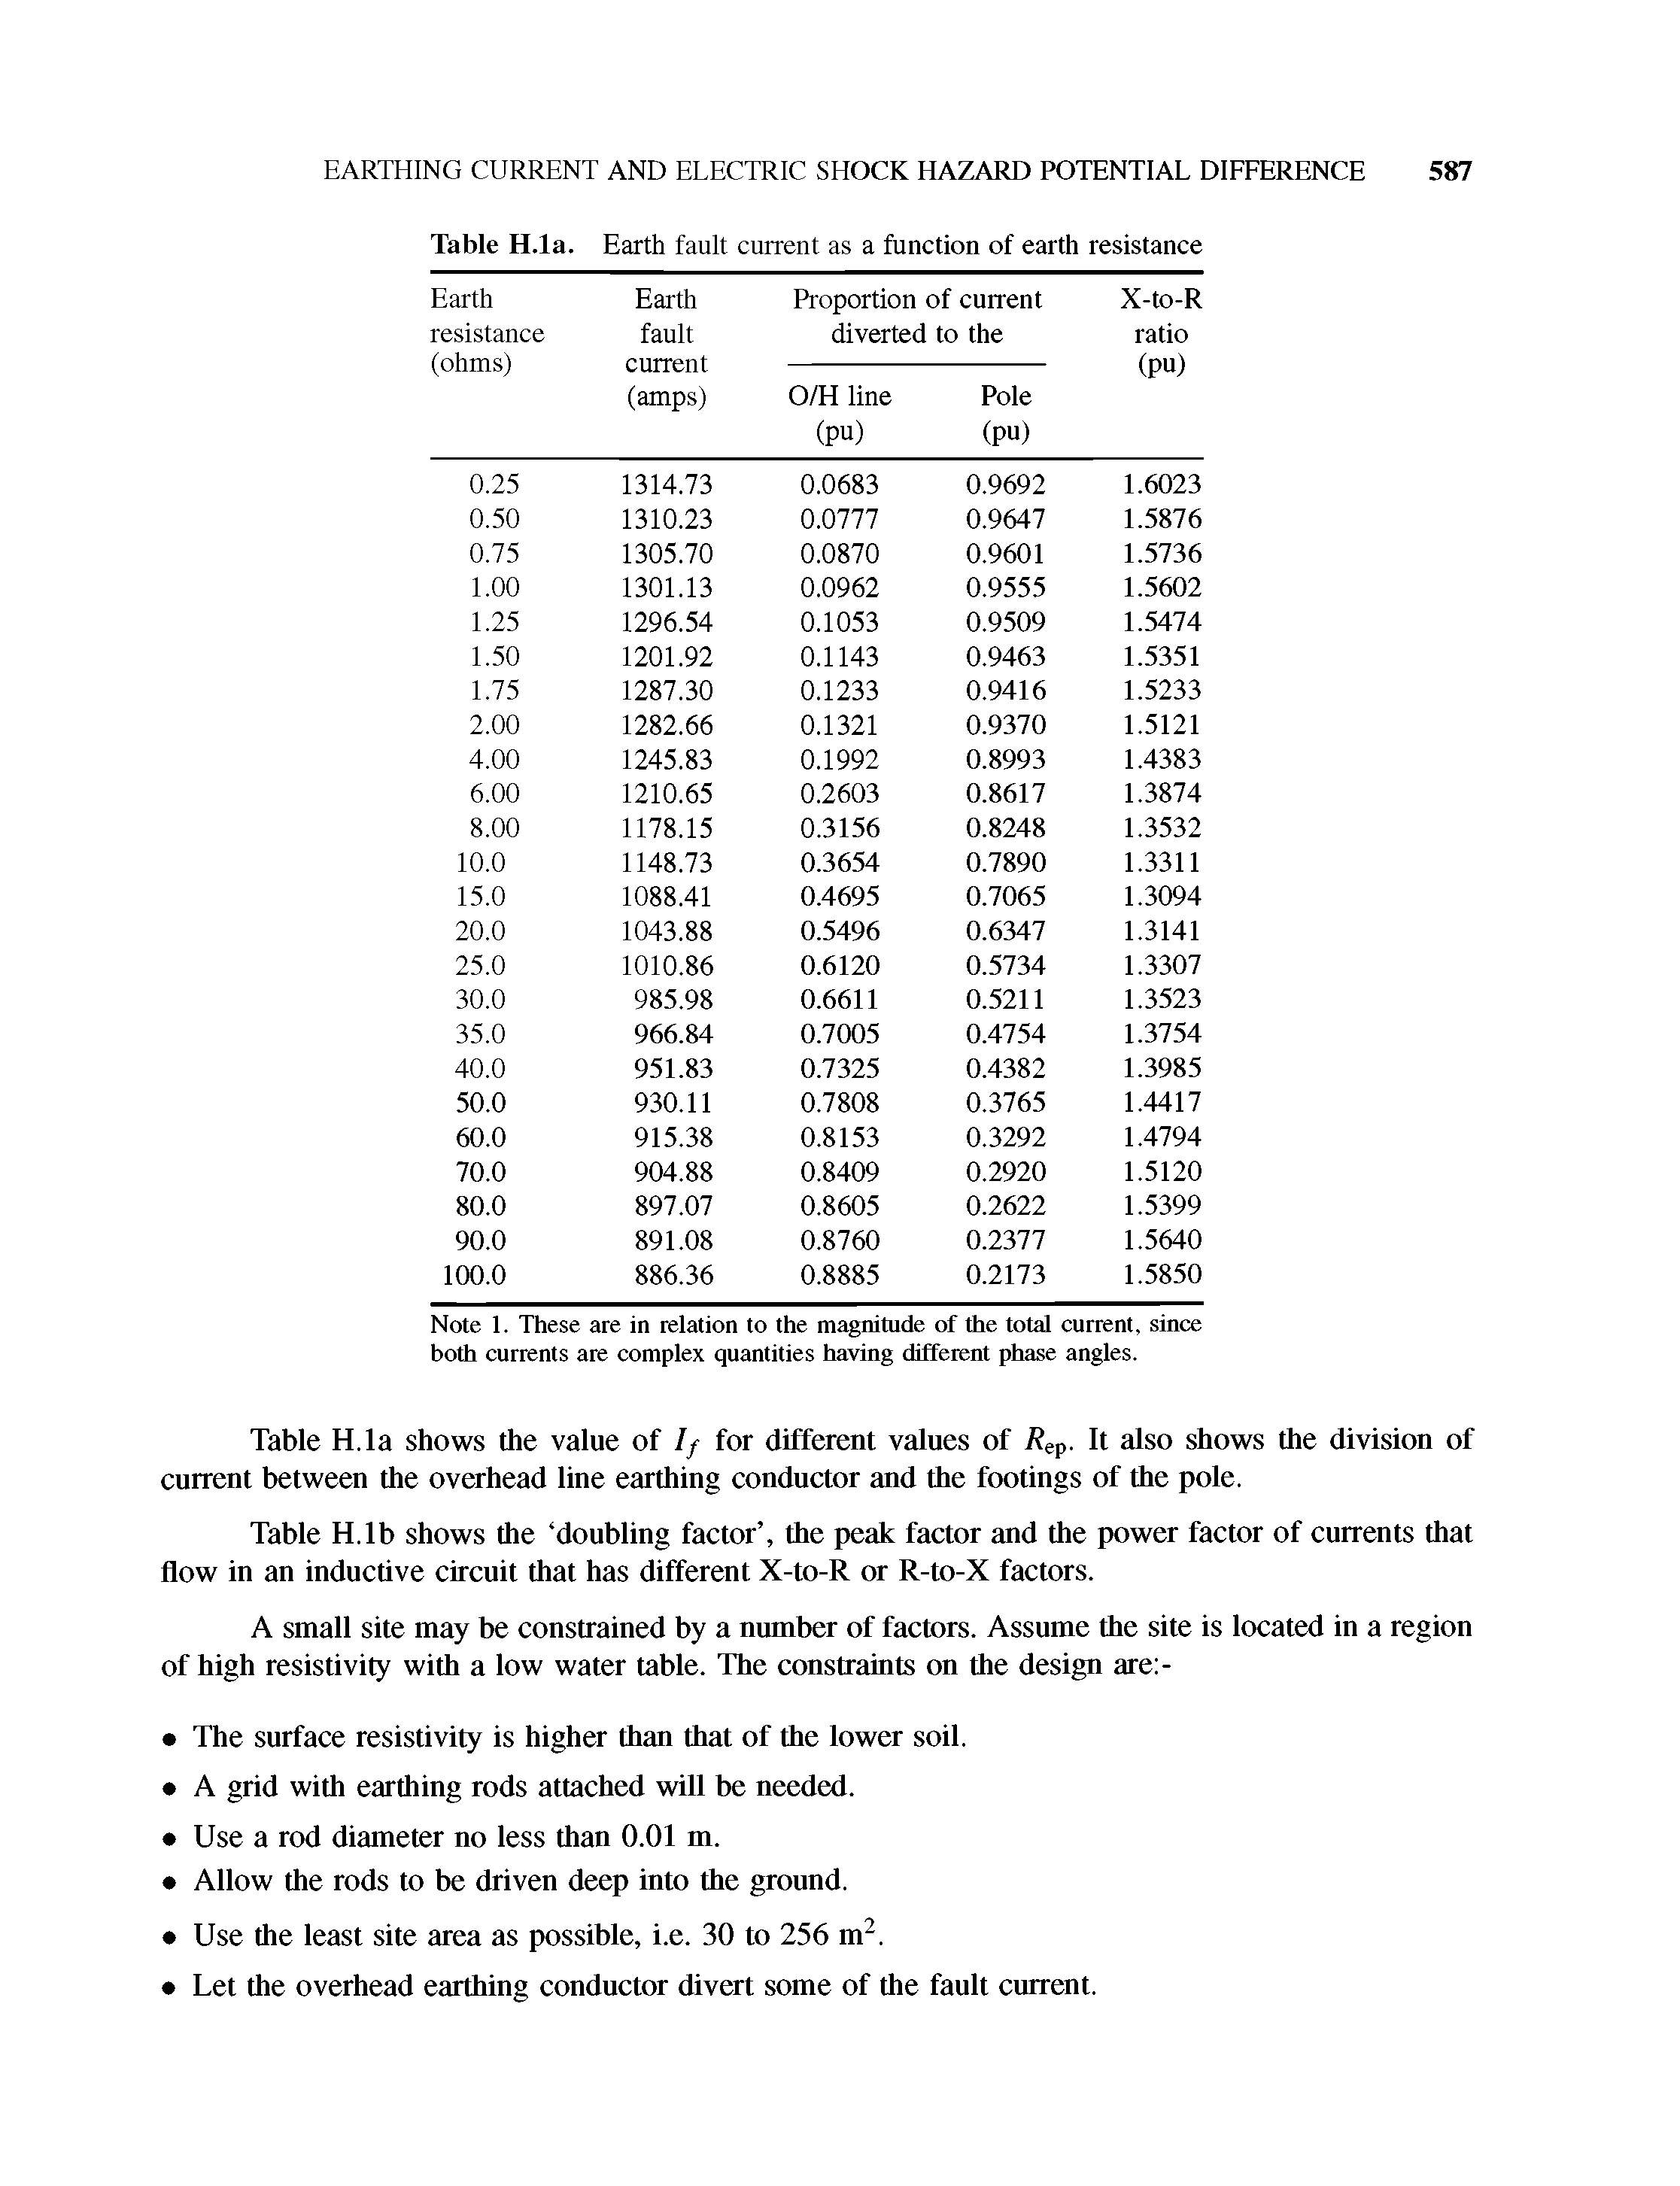 Table H.lb shows the doubling factor , the peak factor and the power factor of currents that flow in an inductive circuit that has different X-to-R or R-to-X factors.